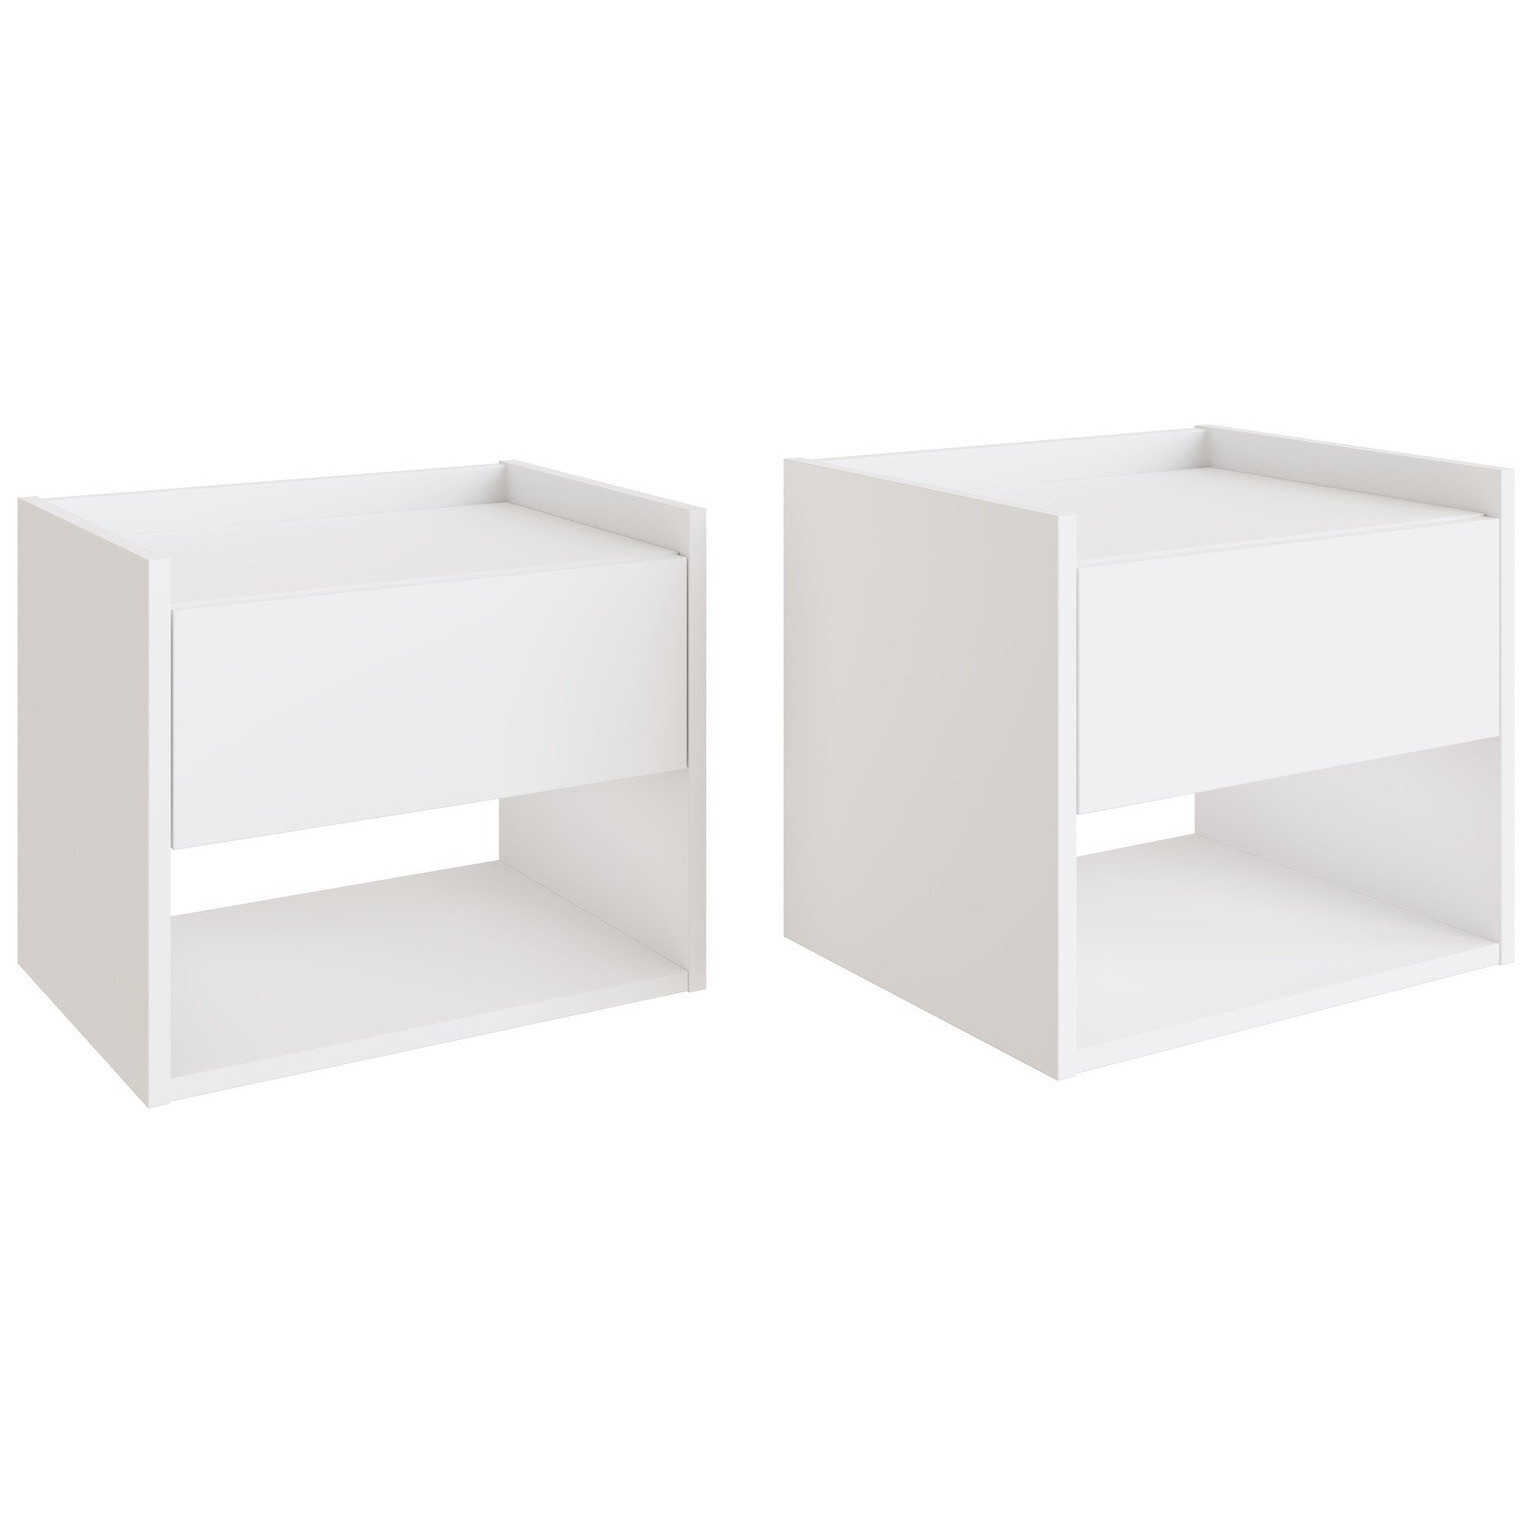 GFW Harmony 2 Wall Mounted Bedside Table Set - White - image 1